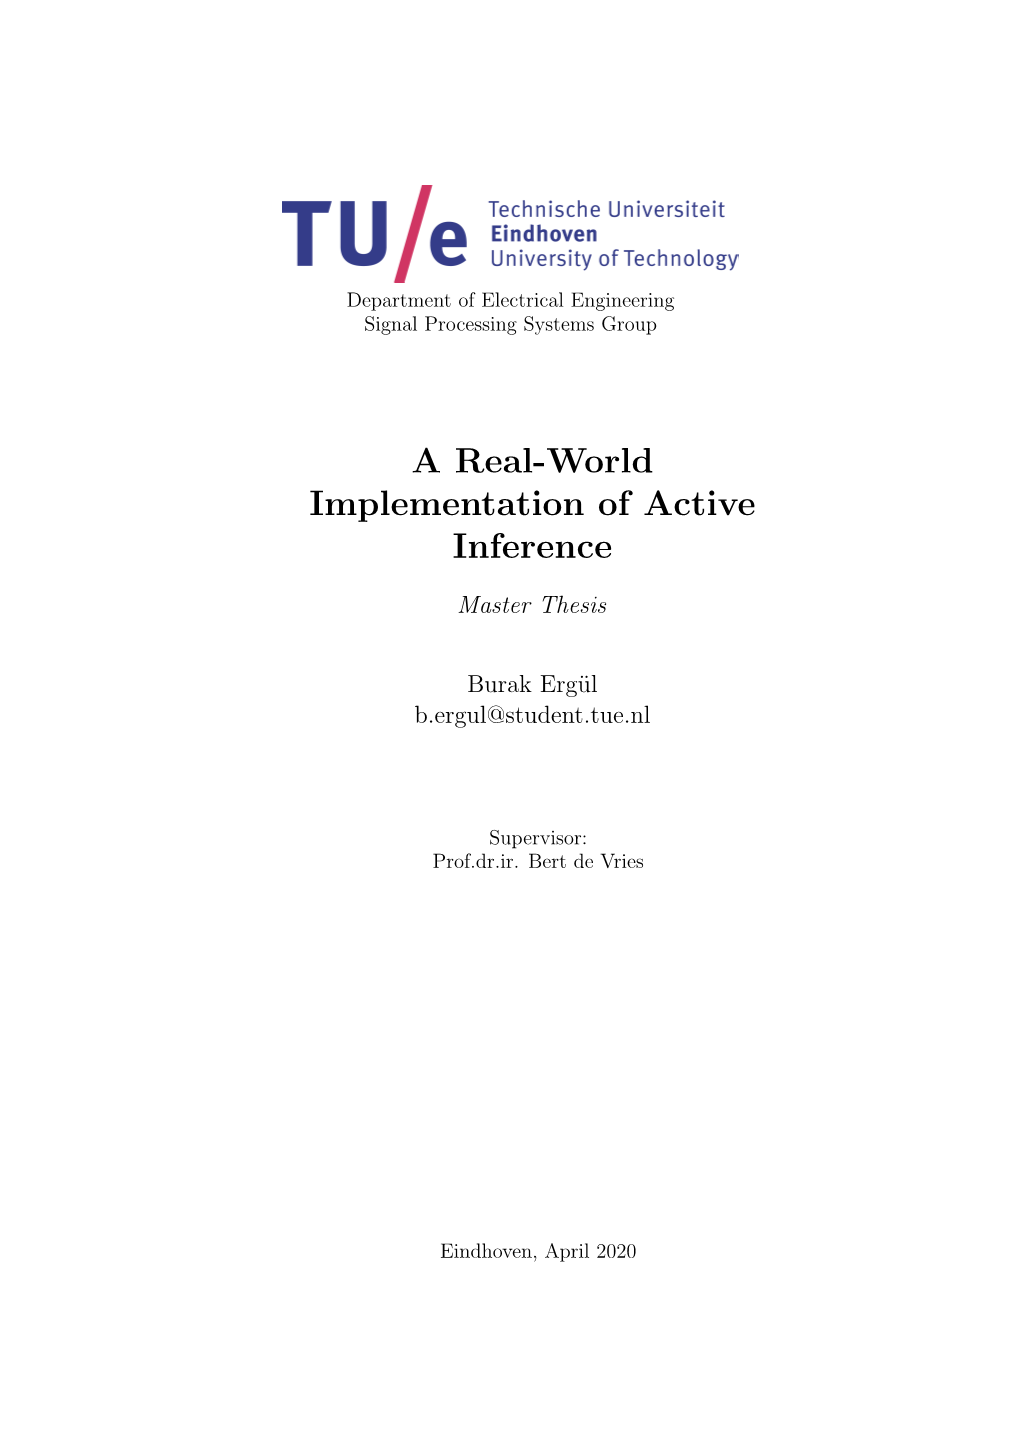 A Real-World Implementation of Active Inference